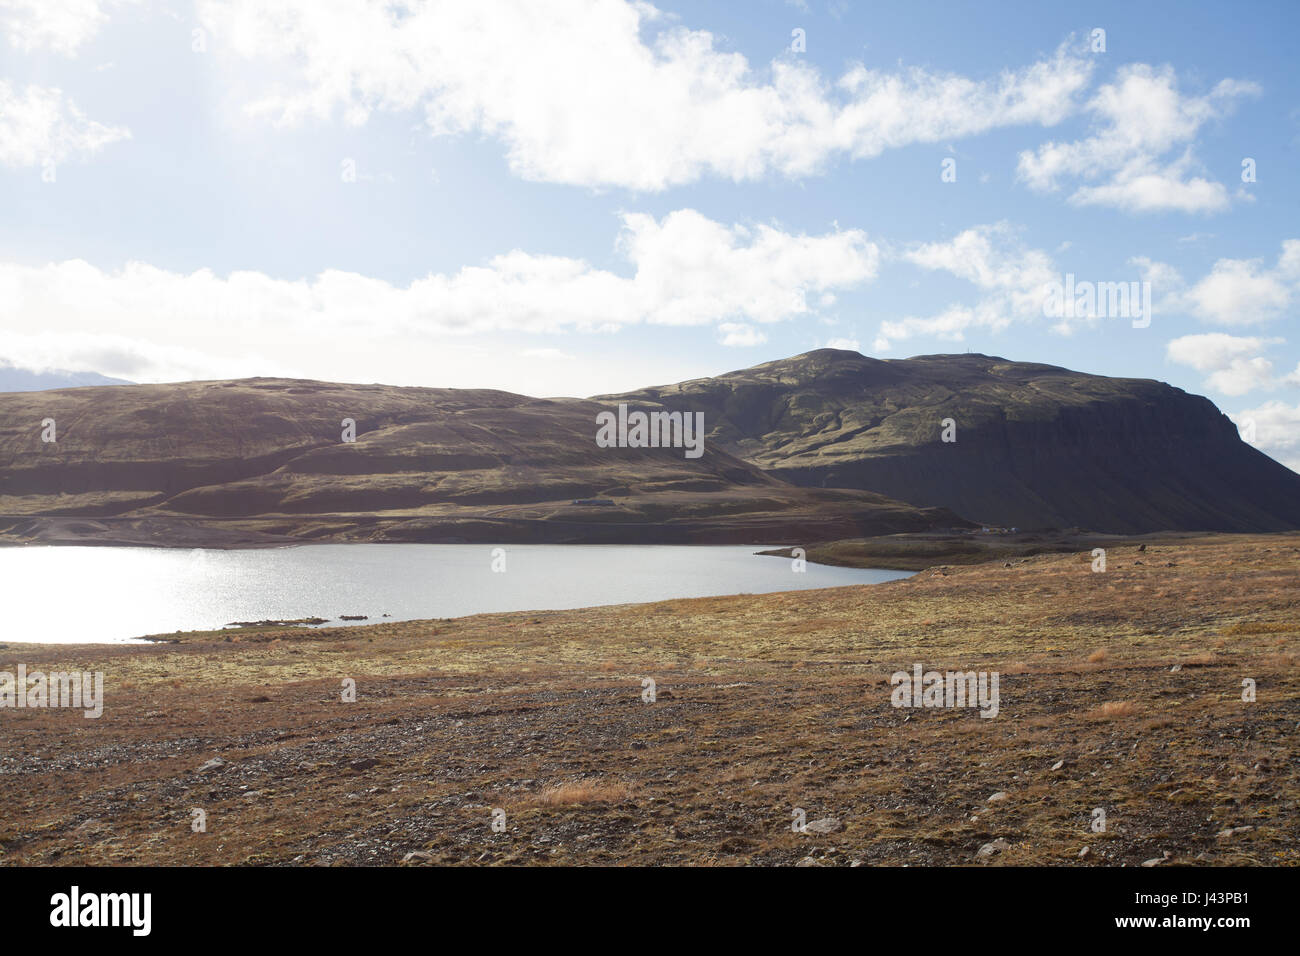 Cold water in Iceland. Stream in rocky mountains and lake side. Fresh and green grass. Beautiful mountain range in the background. Stock Photo